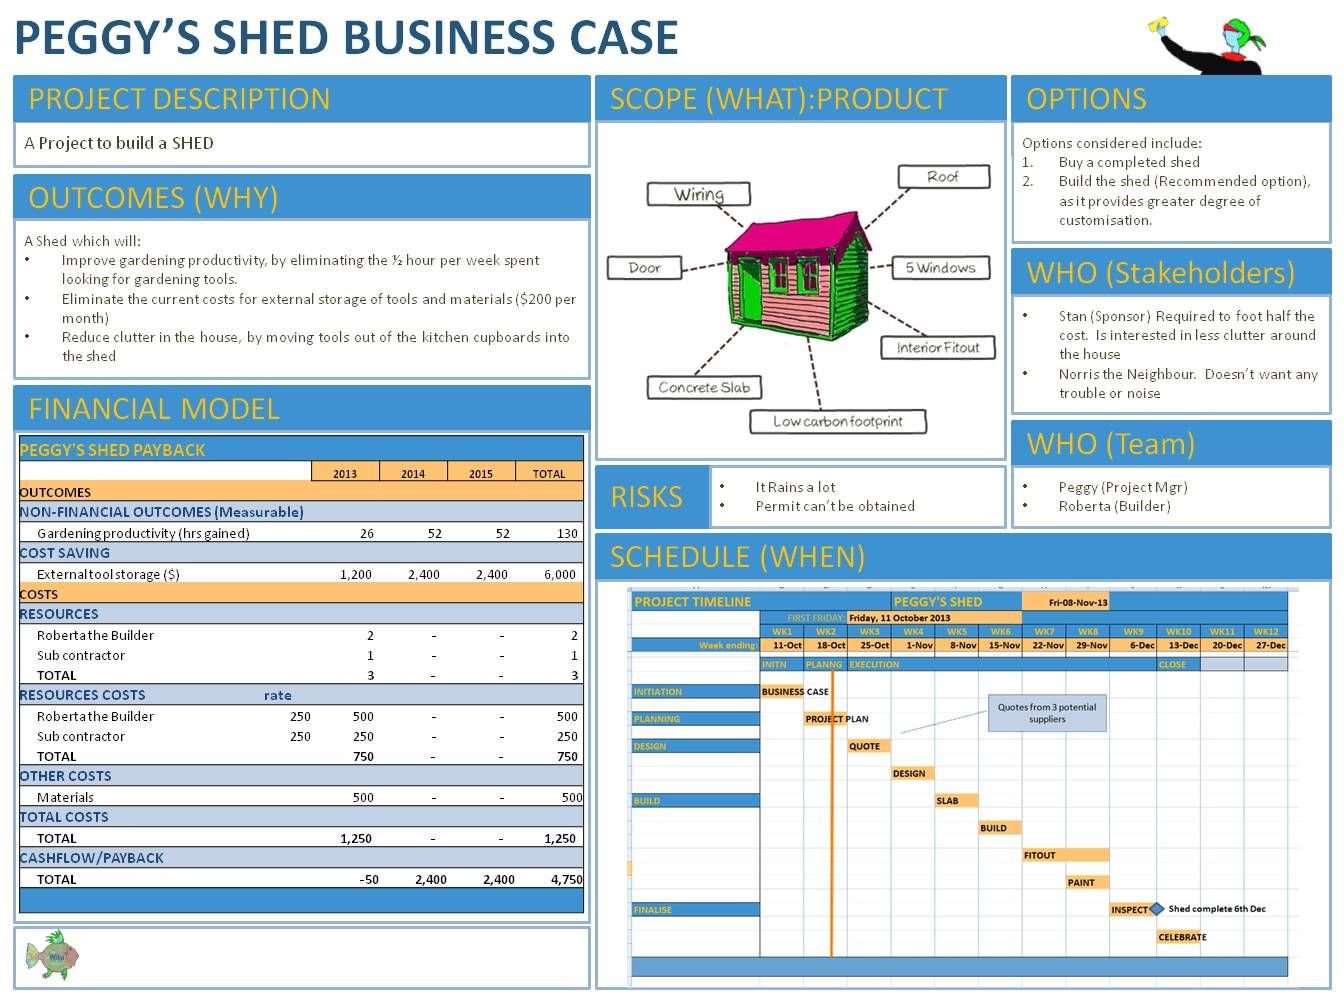 PAGE BUSINESS CASE WILUPROJECTS GQaBD2db